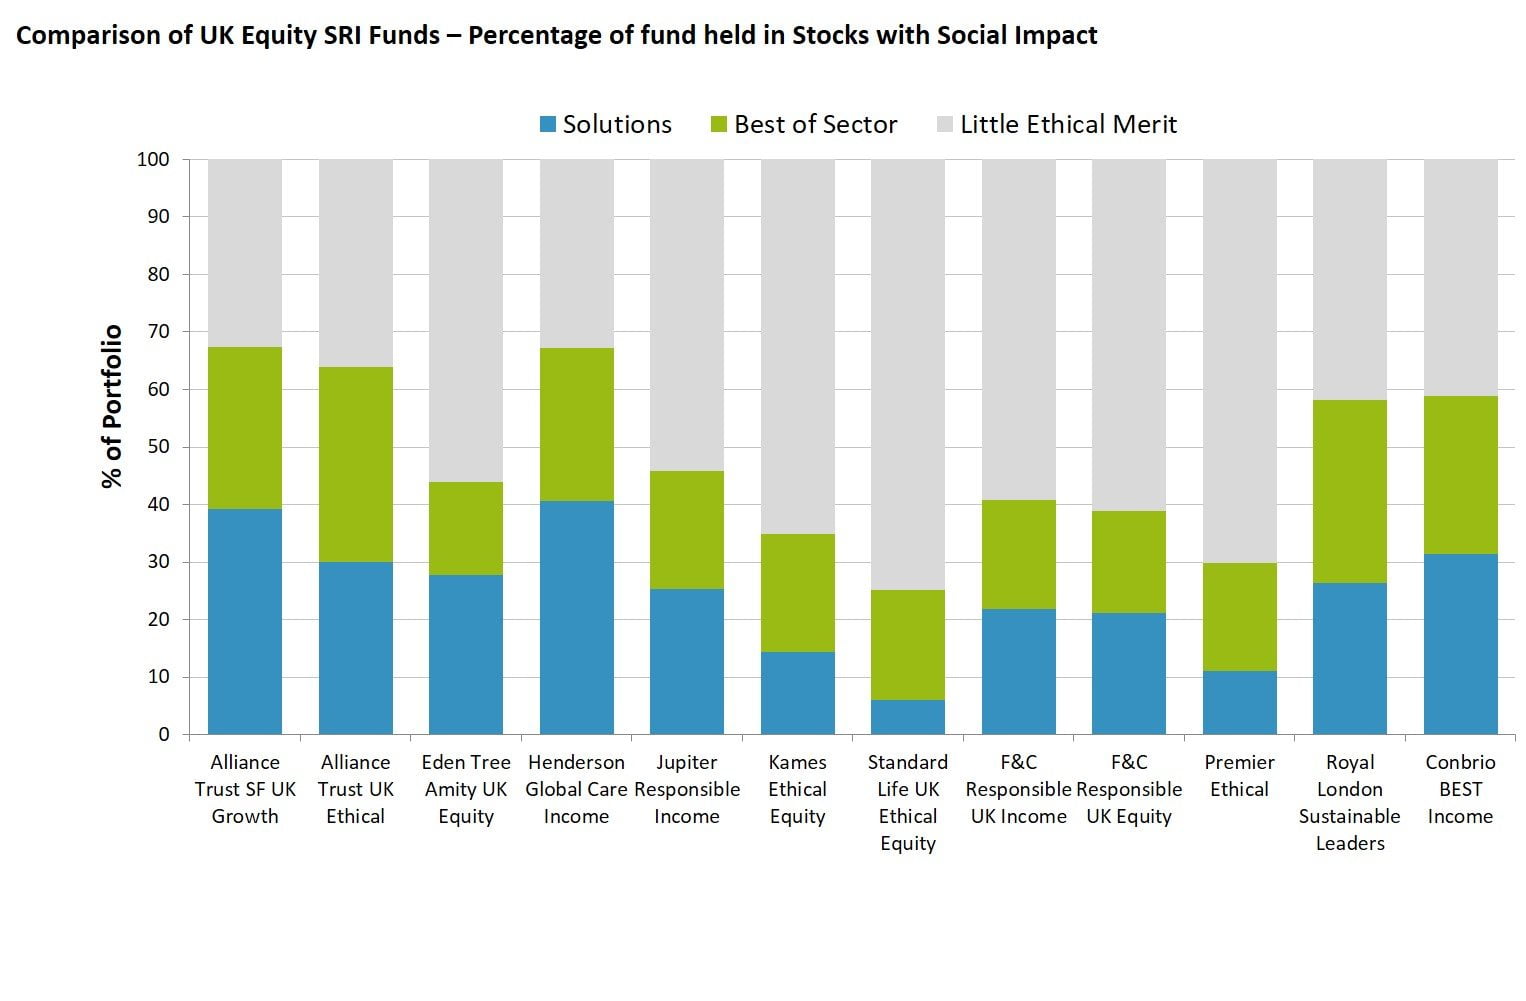 3D Comparison of UK Equity SRI Funds – Percentage of fund held in Stocks with Social Impact